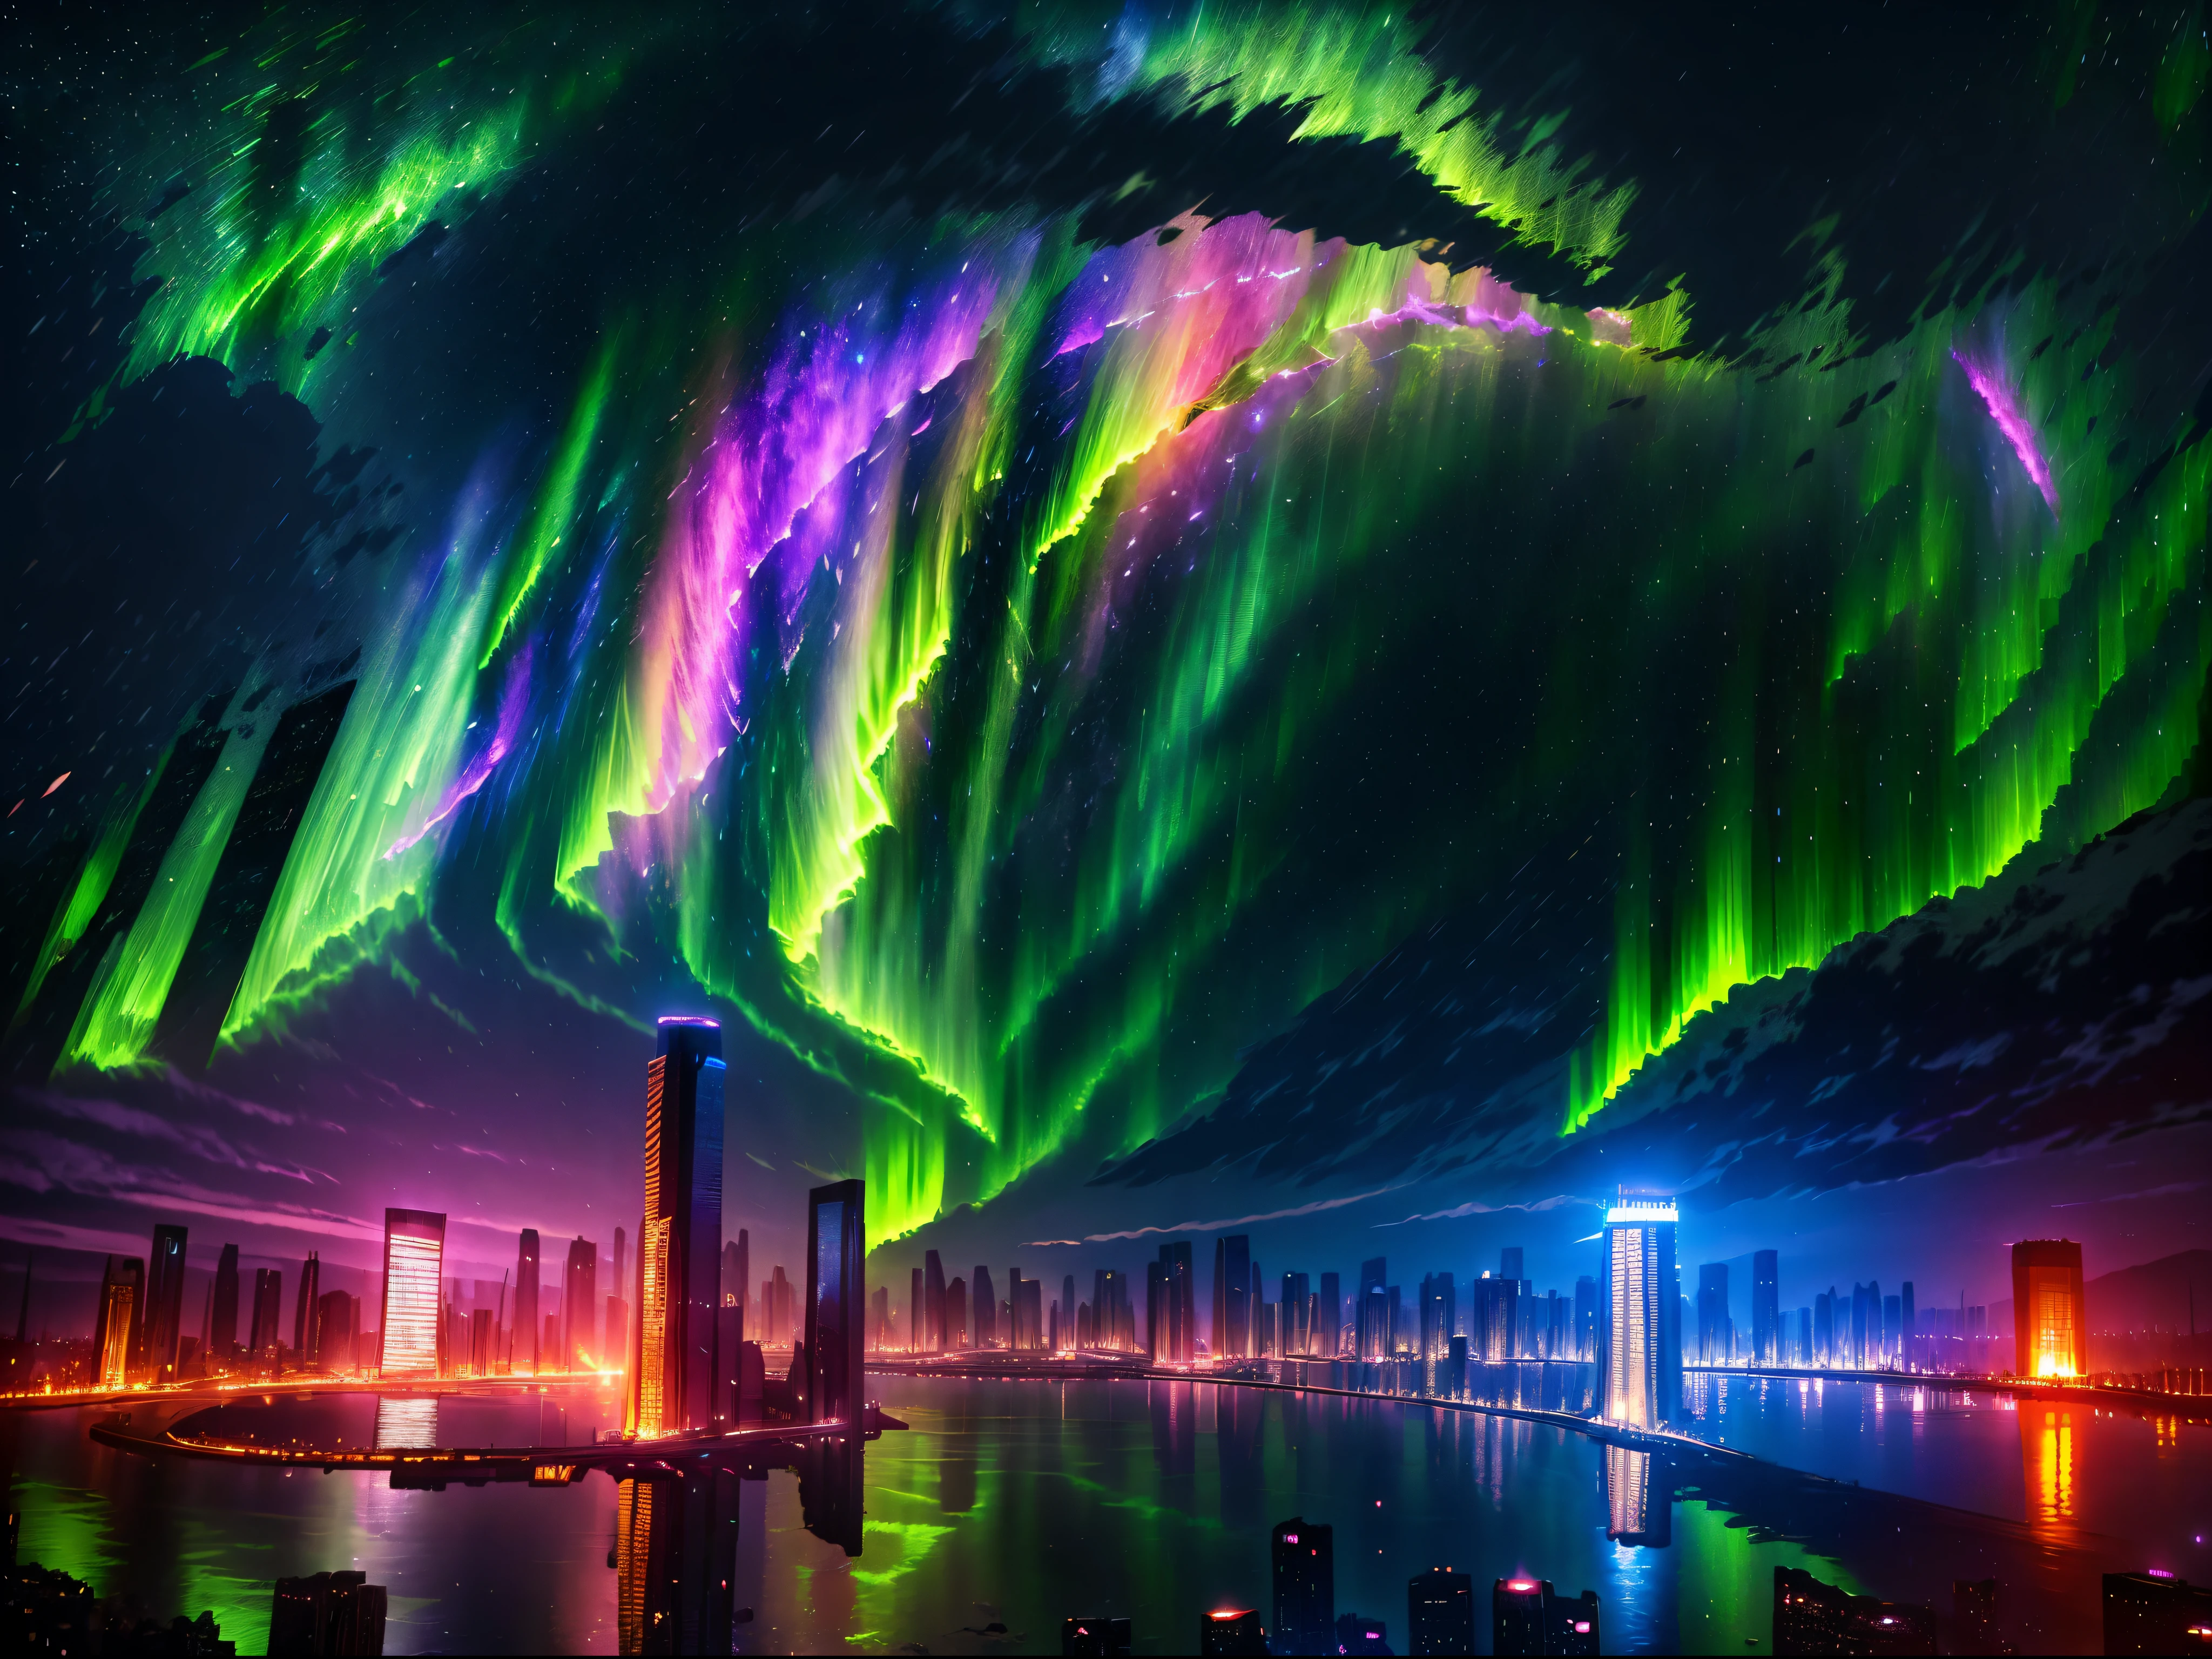 (deep in the night, deep in the night, deep in the night) I see a beautiful, detailed 8k artwork with a sugary pink crystal city, sparkling gold, and a fairytale landscape against a magical night sky.8k,((huge full city)),(space city),(nothern lights,detailed),((high quality))